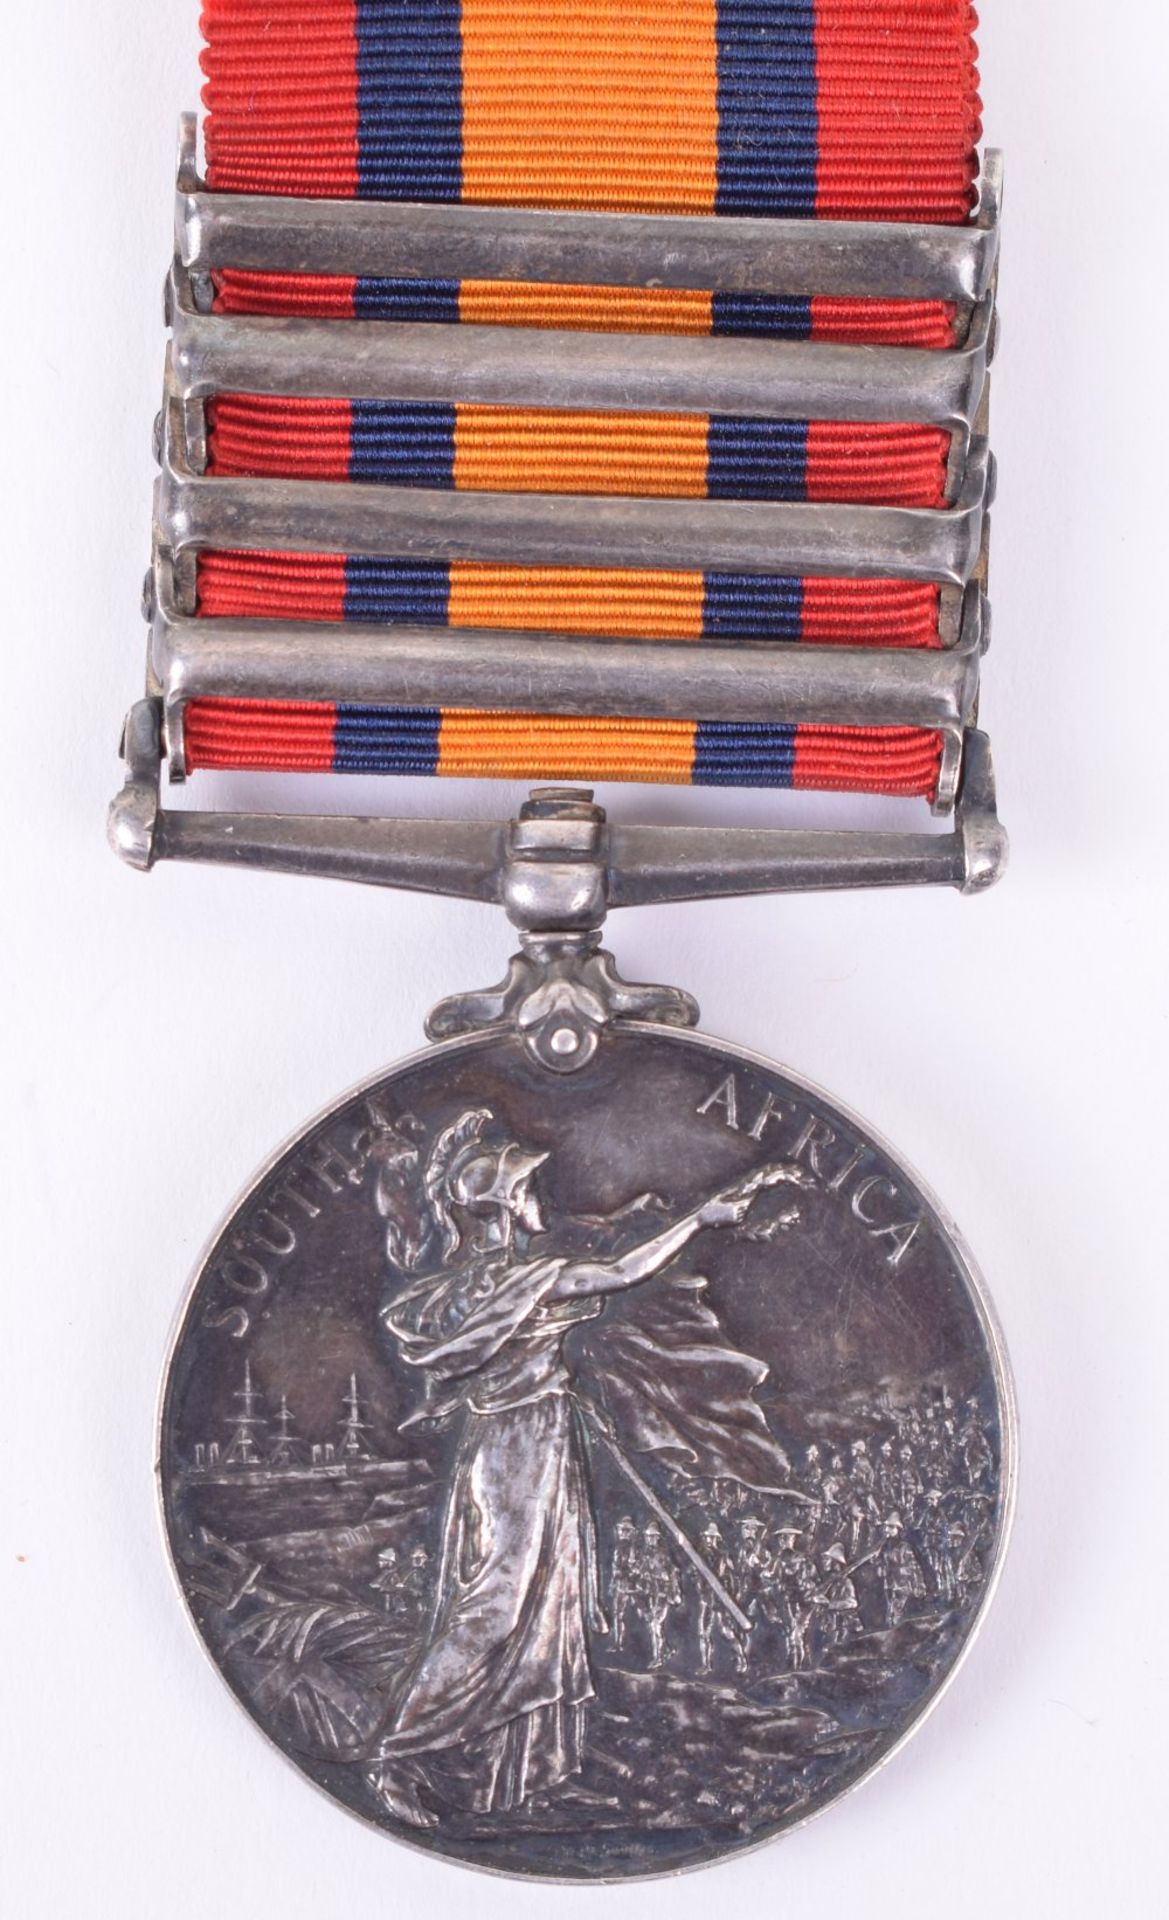 Queens South Africa Medal Kings Royal Rifle Corps - Image 3 of 3